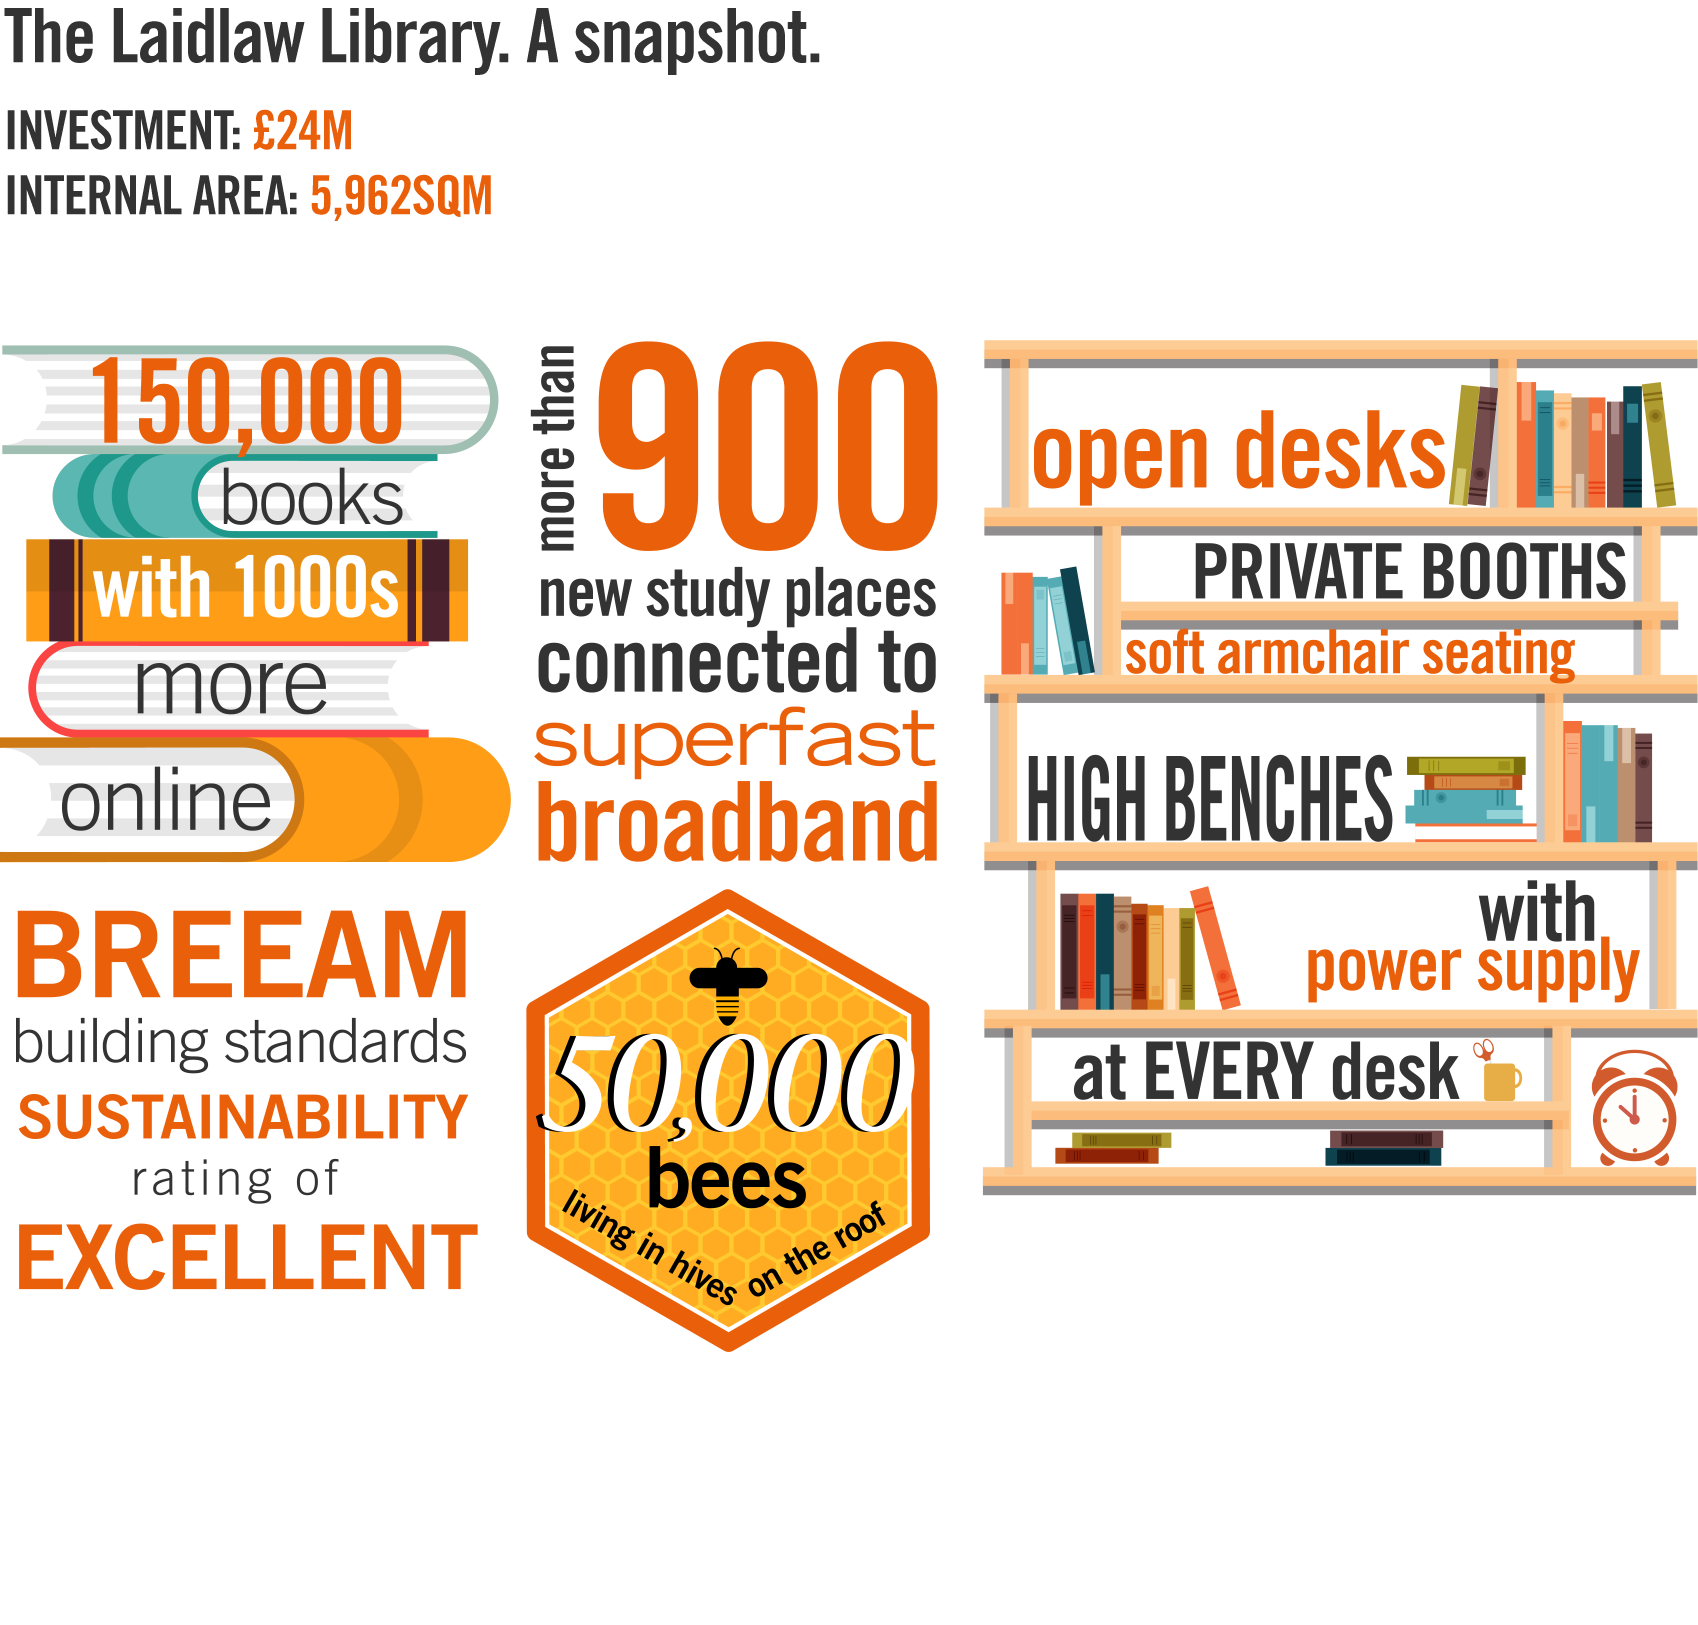 Laidlaw library infographic